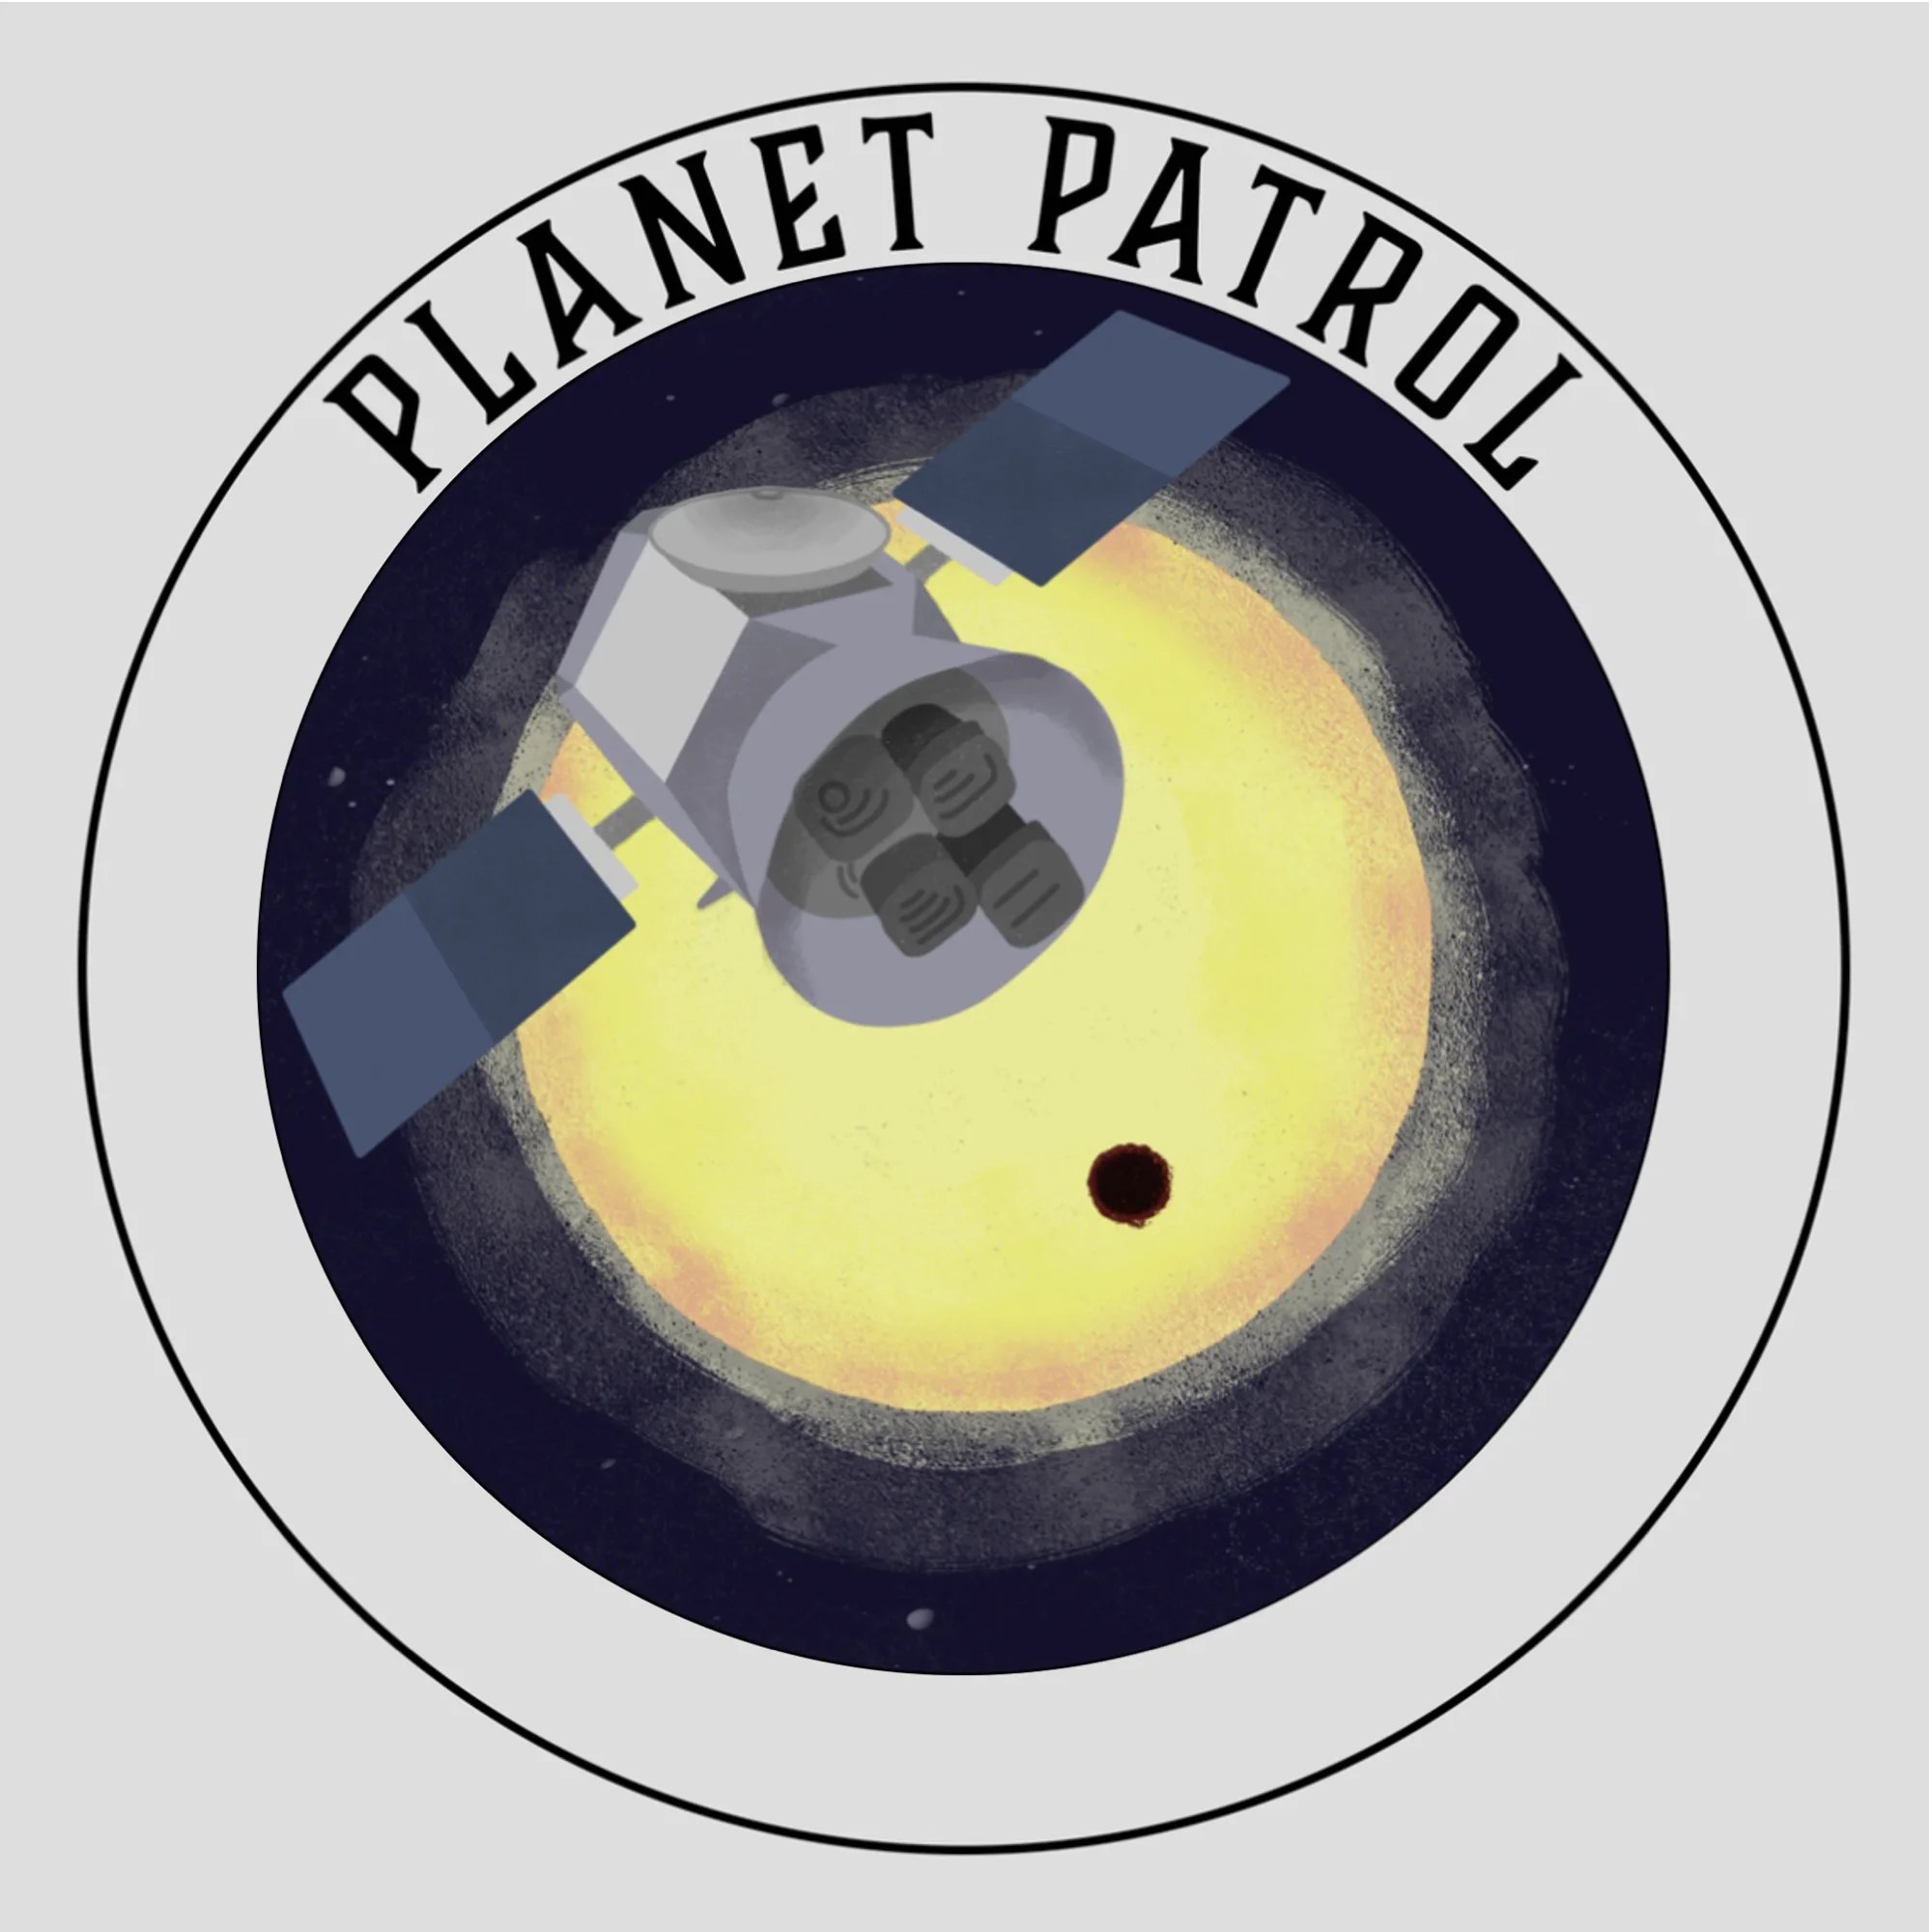 Illustration of the yellow sun fading to orange around the outside and a planet represented by a black dot transiting across. An illustrated satellite overlays the sun and the text Planet Patrol sits above the illustration.